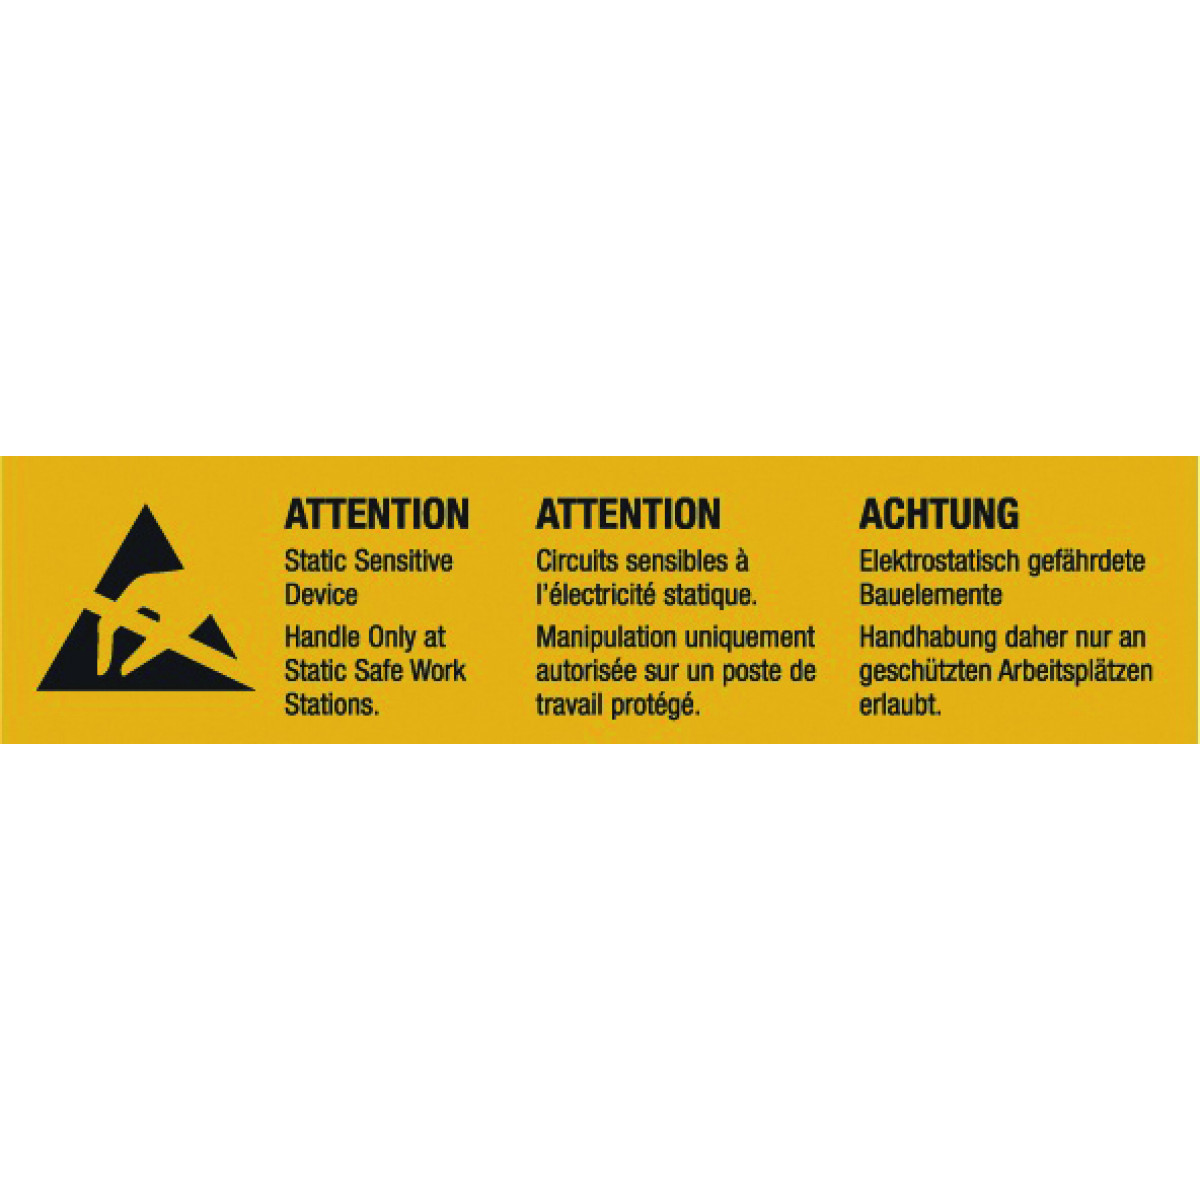 Warning icon with text